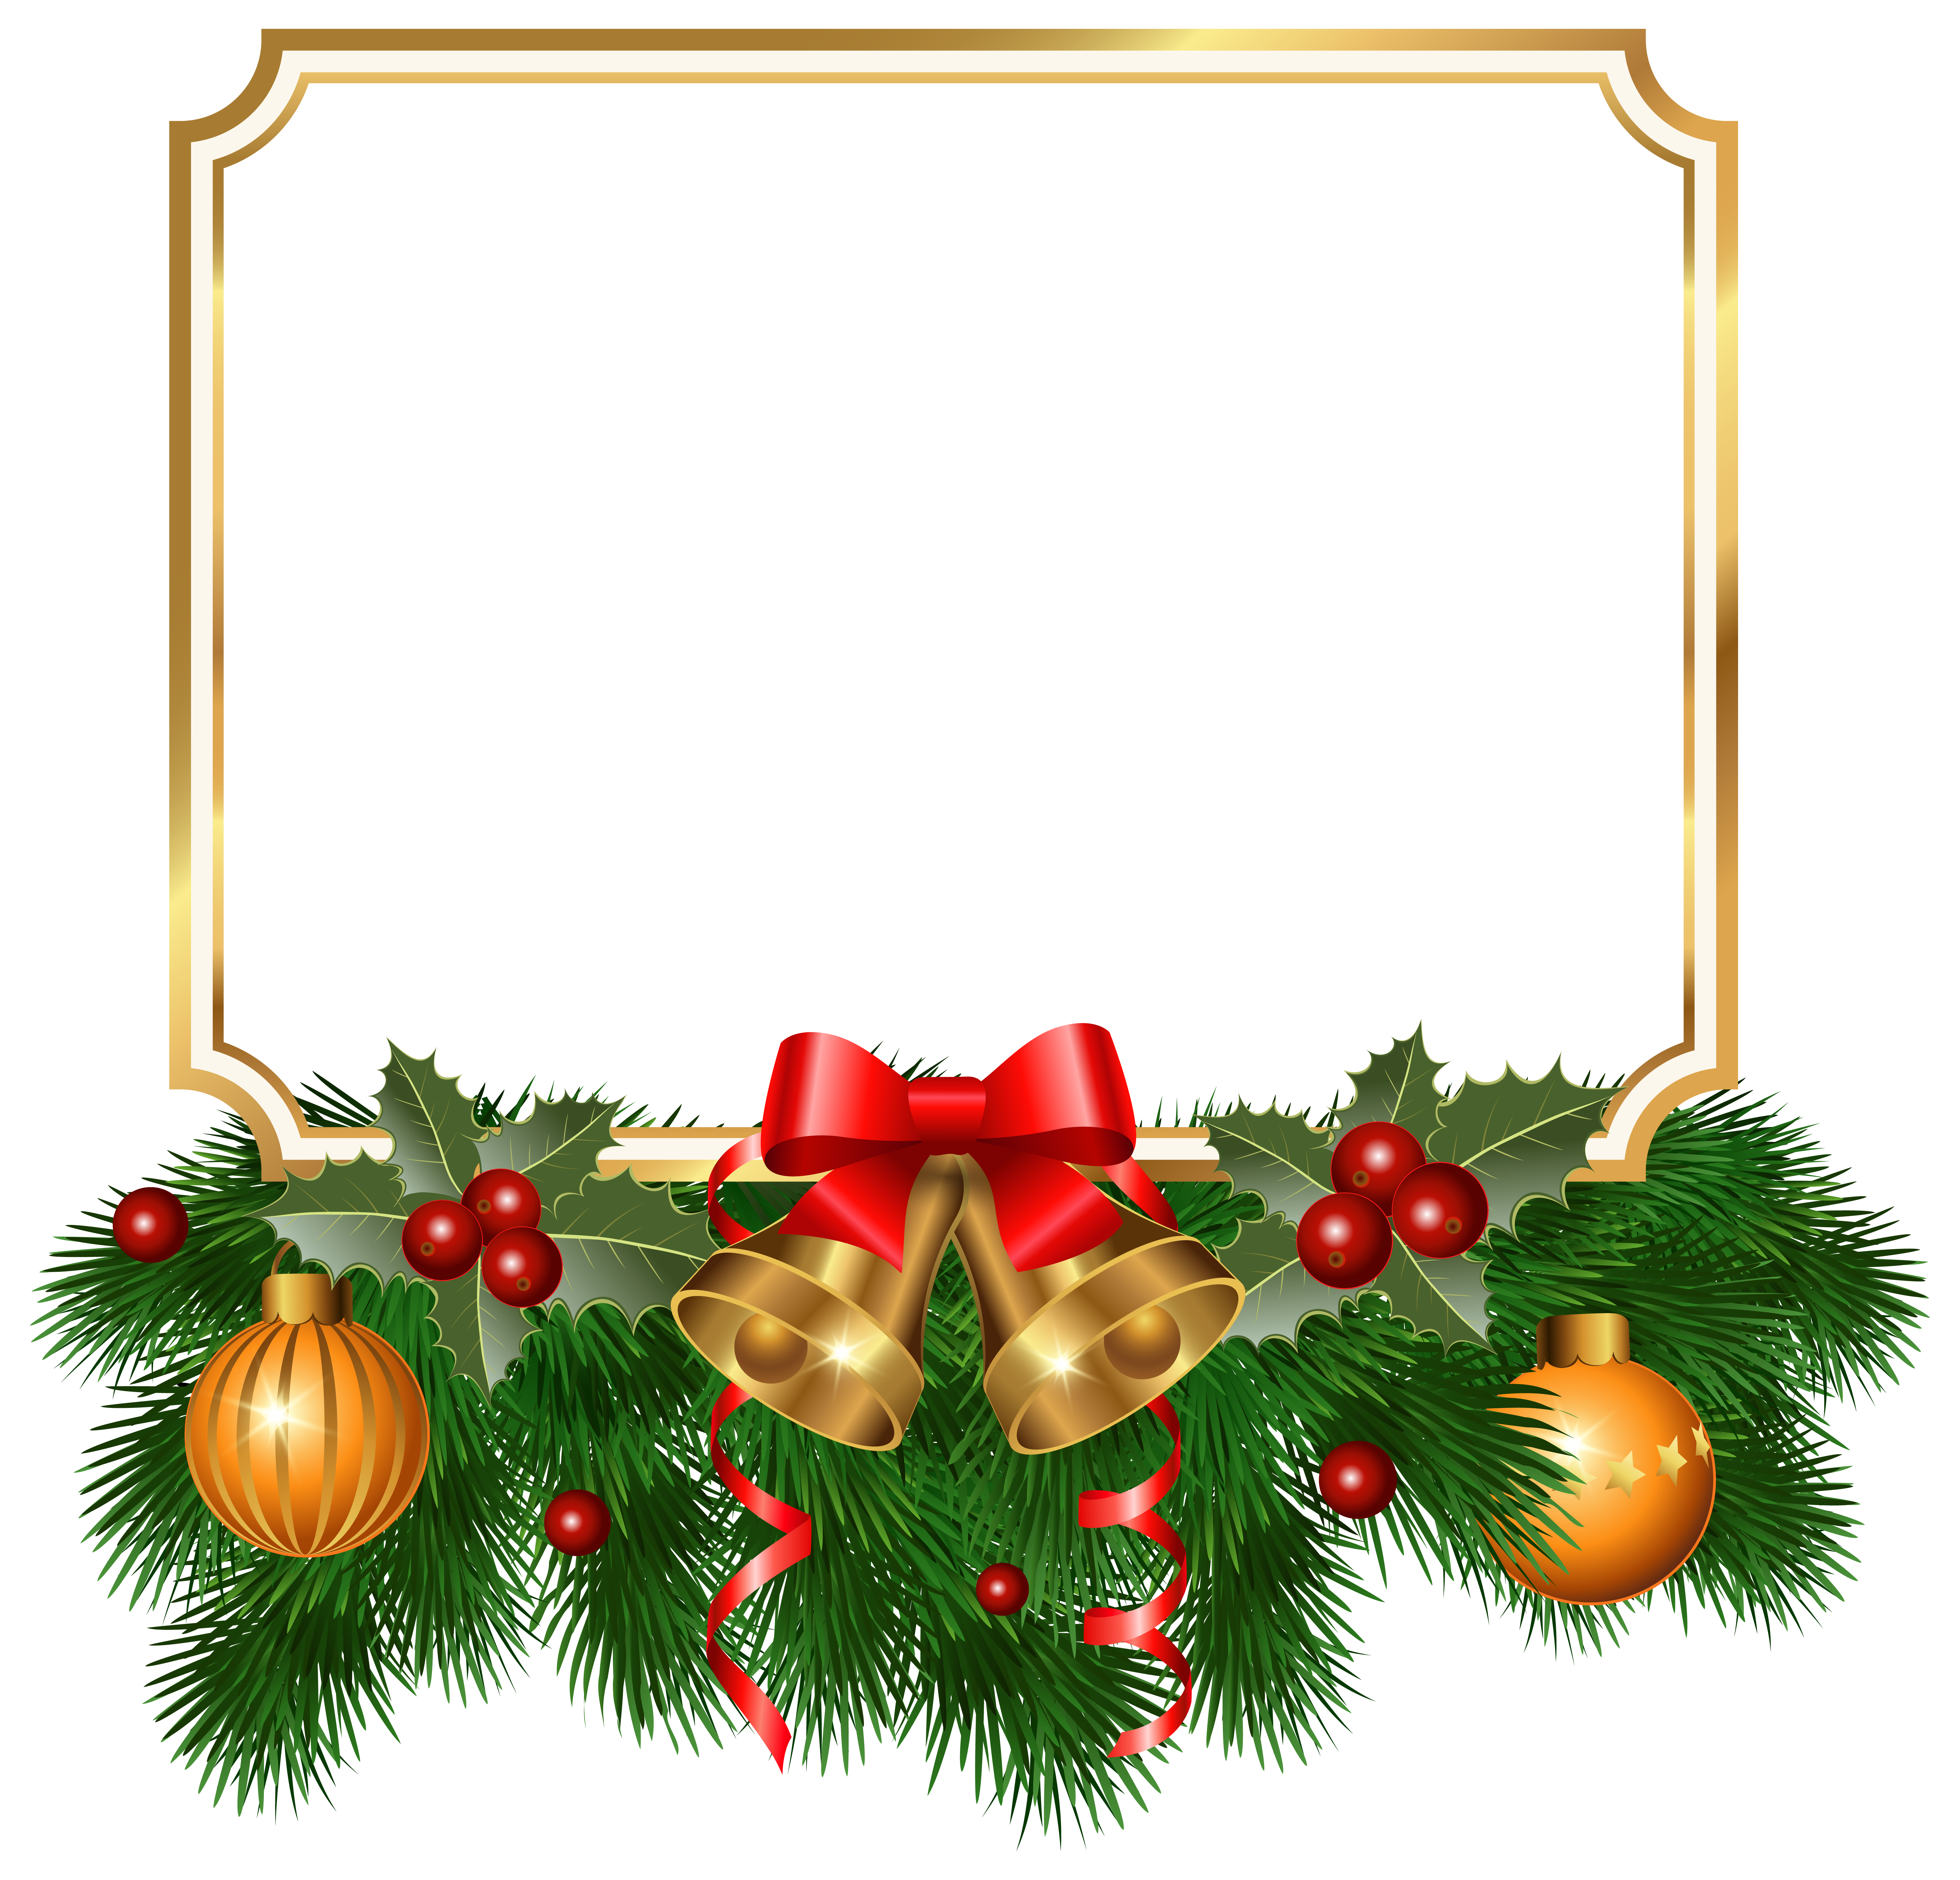 Fir Golden Tree Ornament Border Christmas PNG Image from Holidays Christmas. 